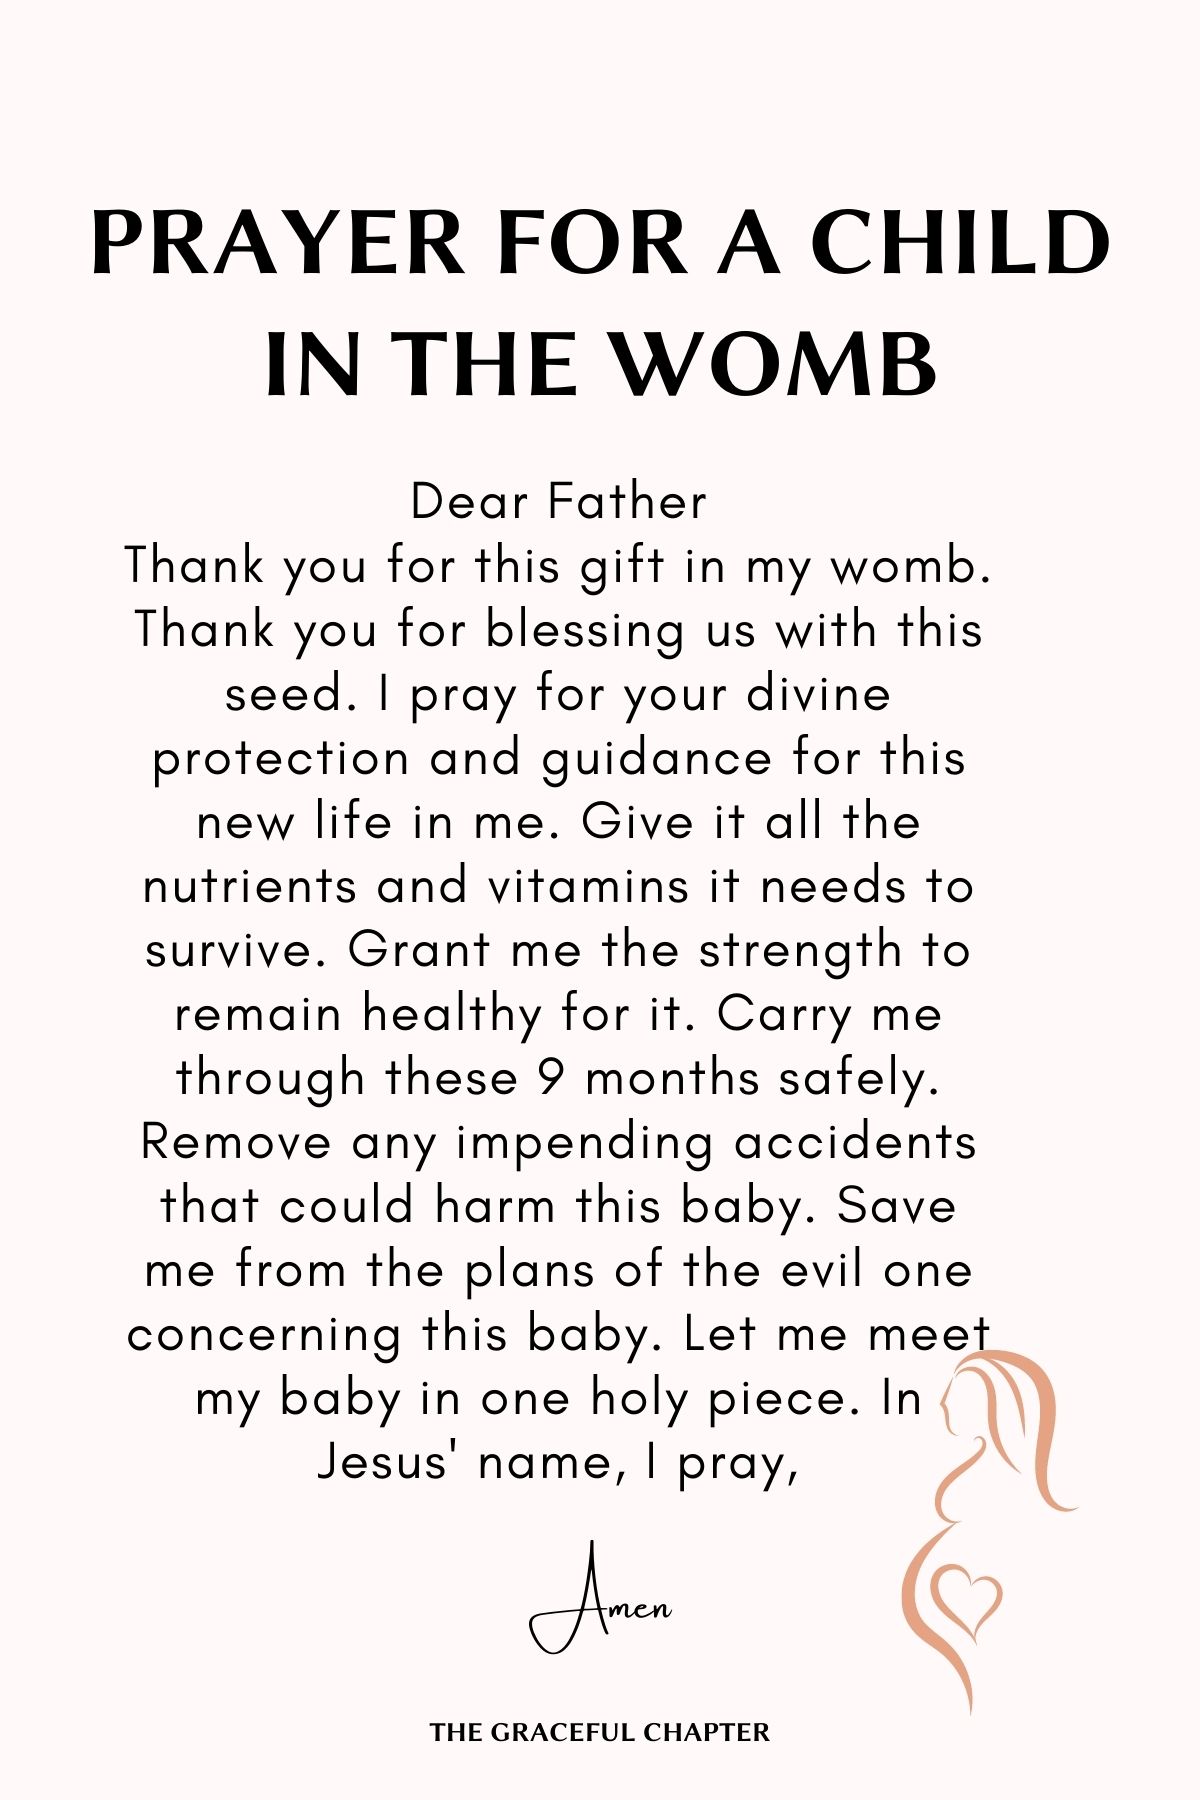 Prayer for a child in the womb